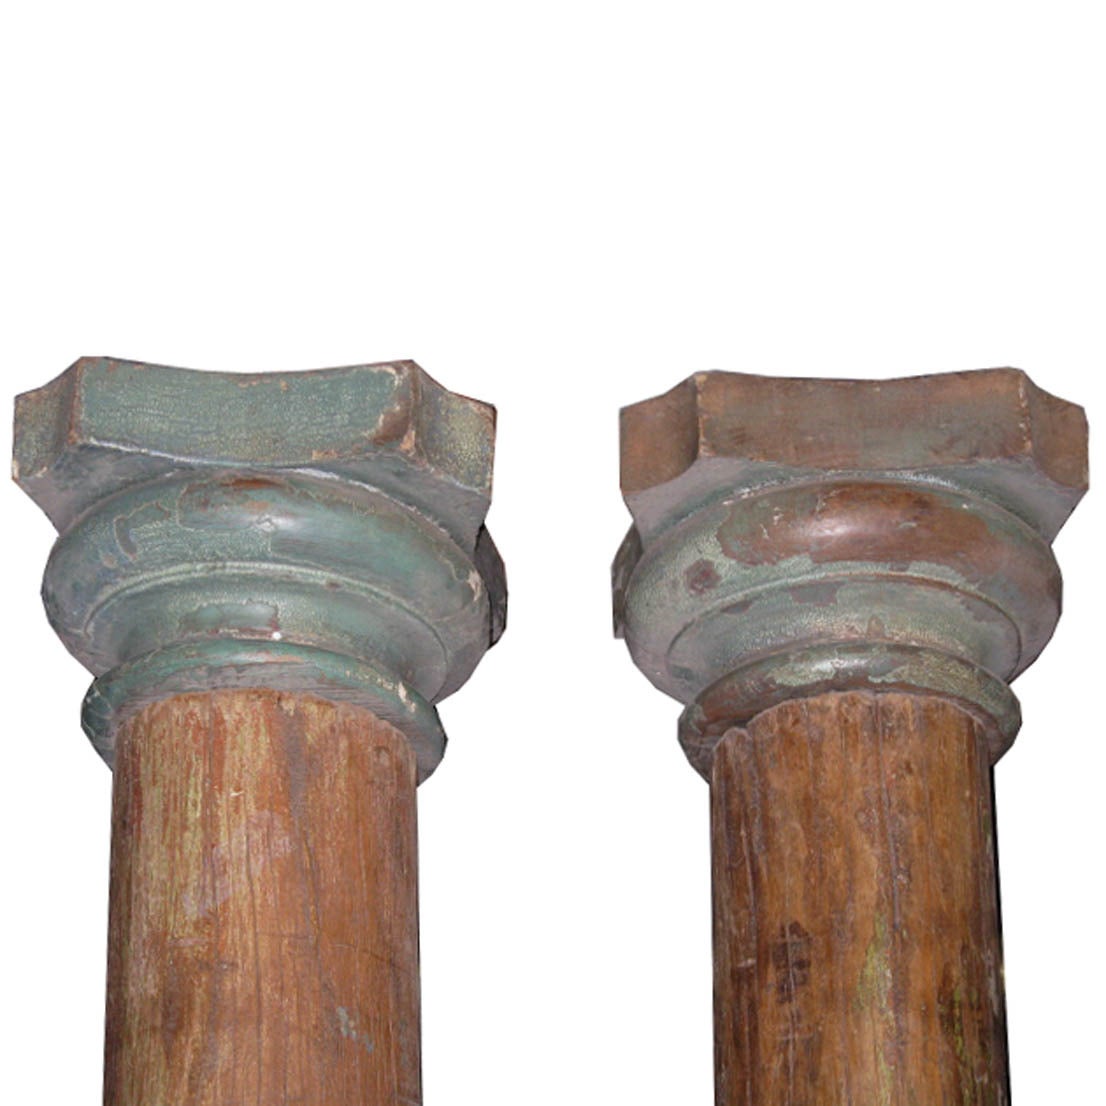 Pair of beautiful wood columns from a Haveli in Gujarat, India. The columns have carved wood capitals and stone bases. Originally used to adorn an entry in a traditional Indian Haveli. Assembly required.